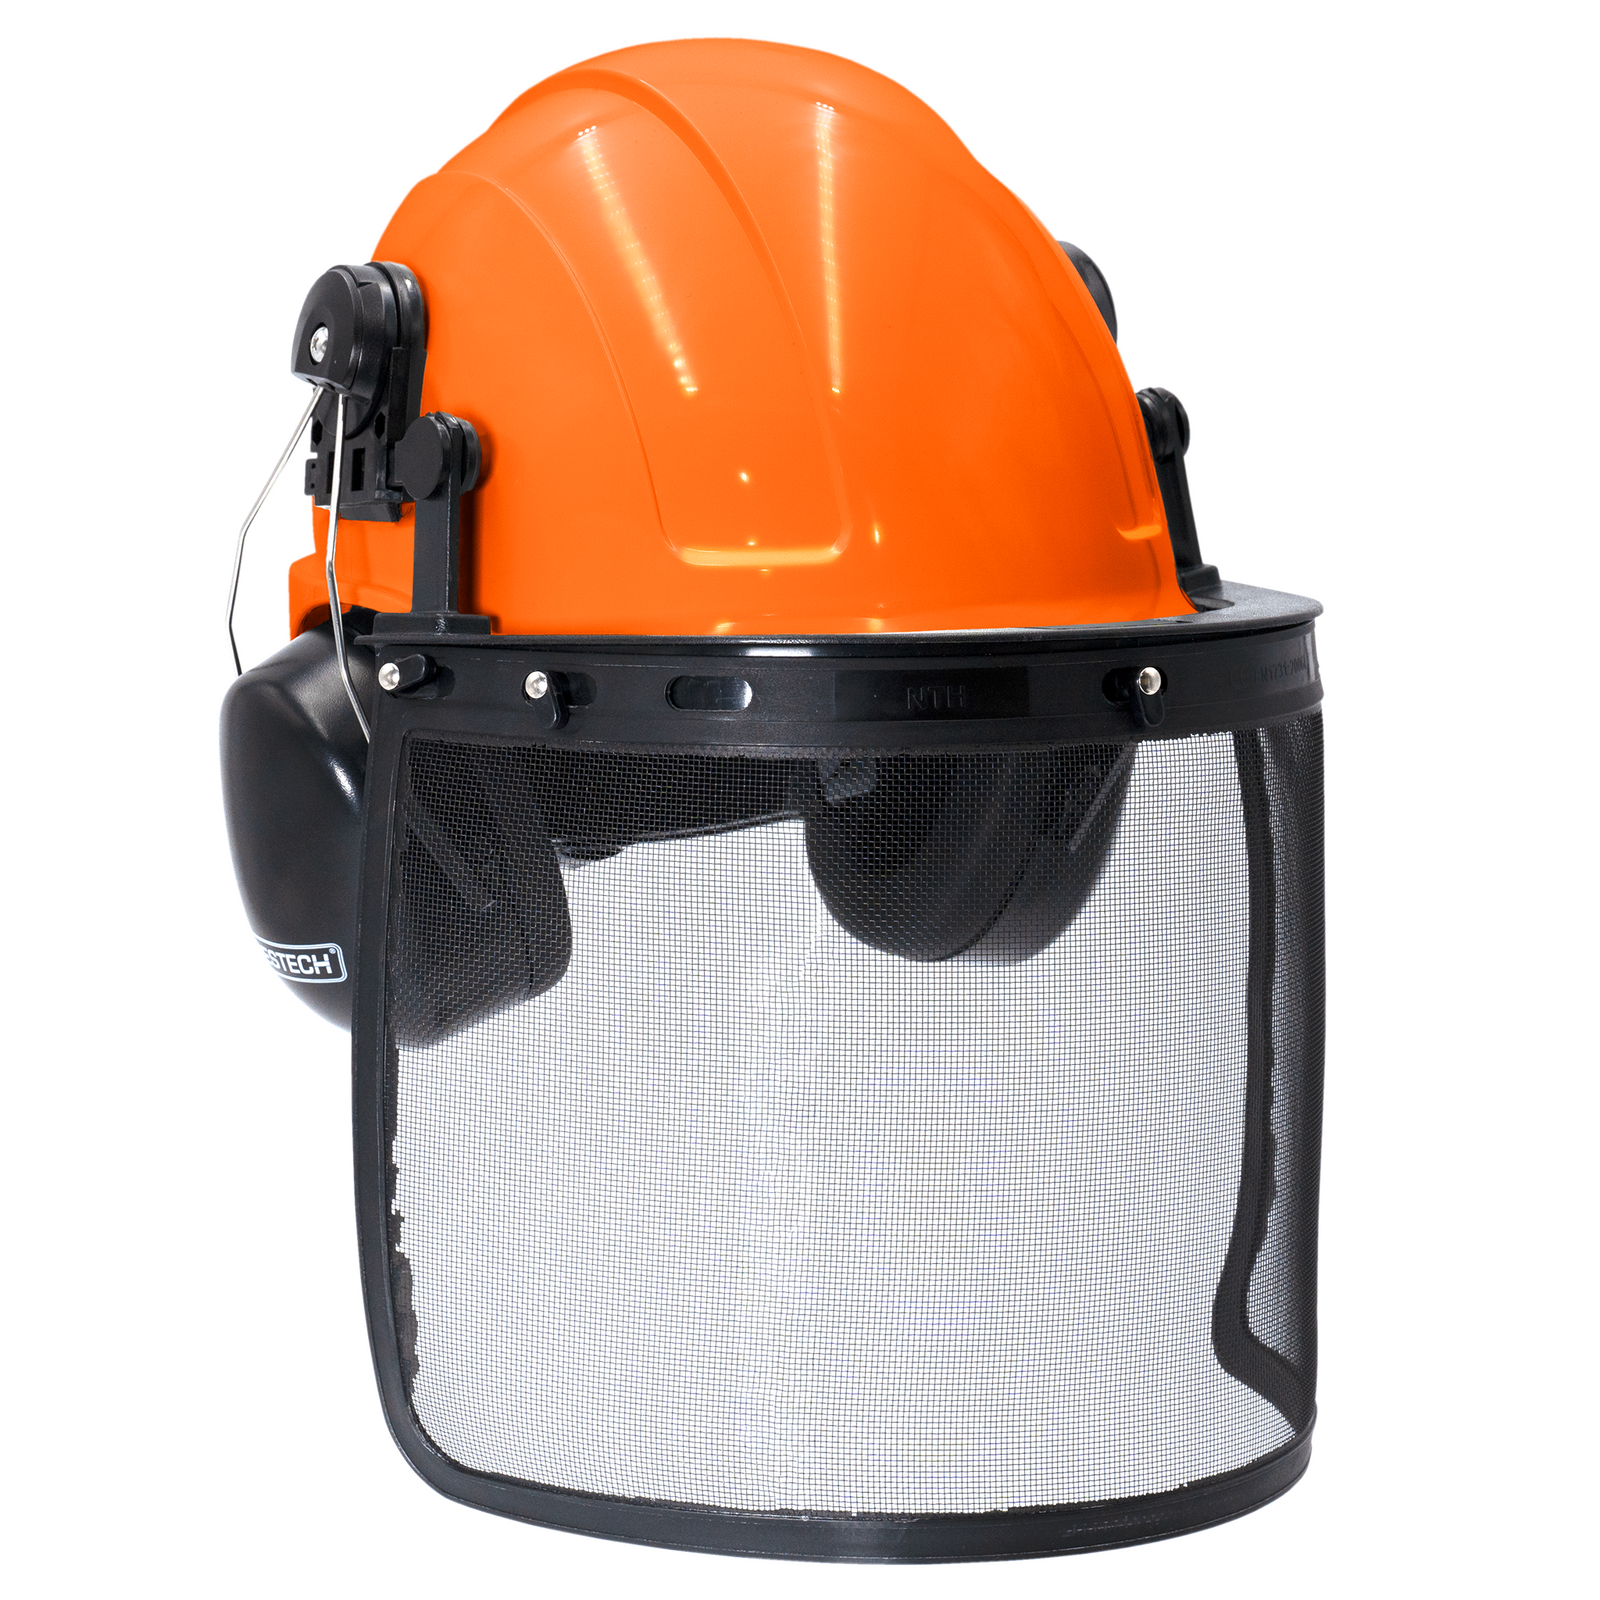 Orange safety cap style helmet with iron mesh face shield and earmuffs for hearing protection